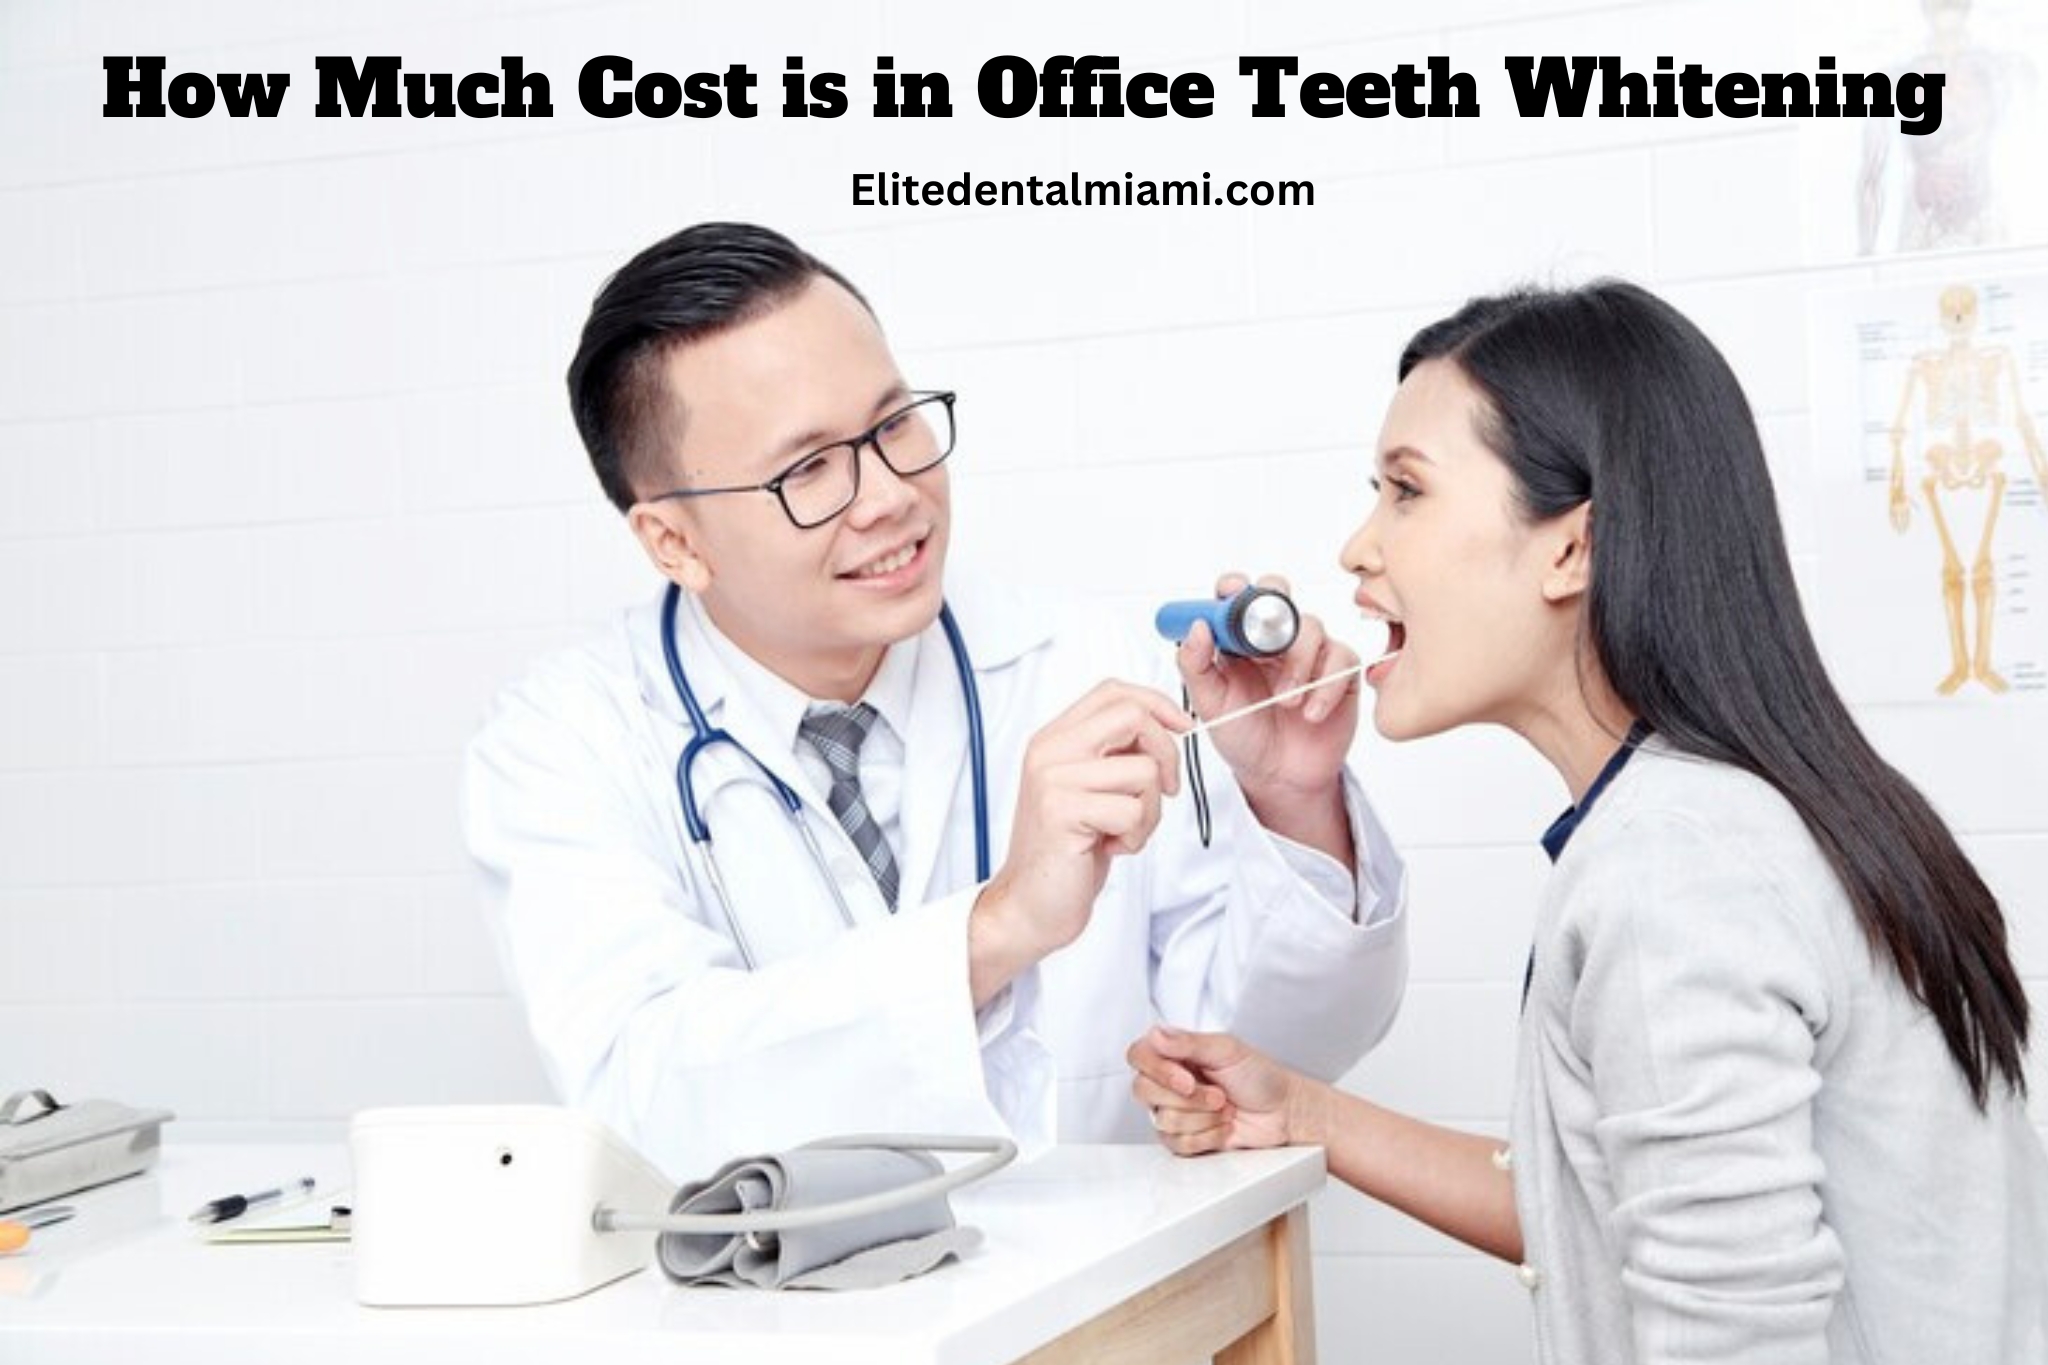 How Much Cost is in Office Teeth Whitening